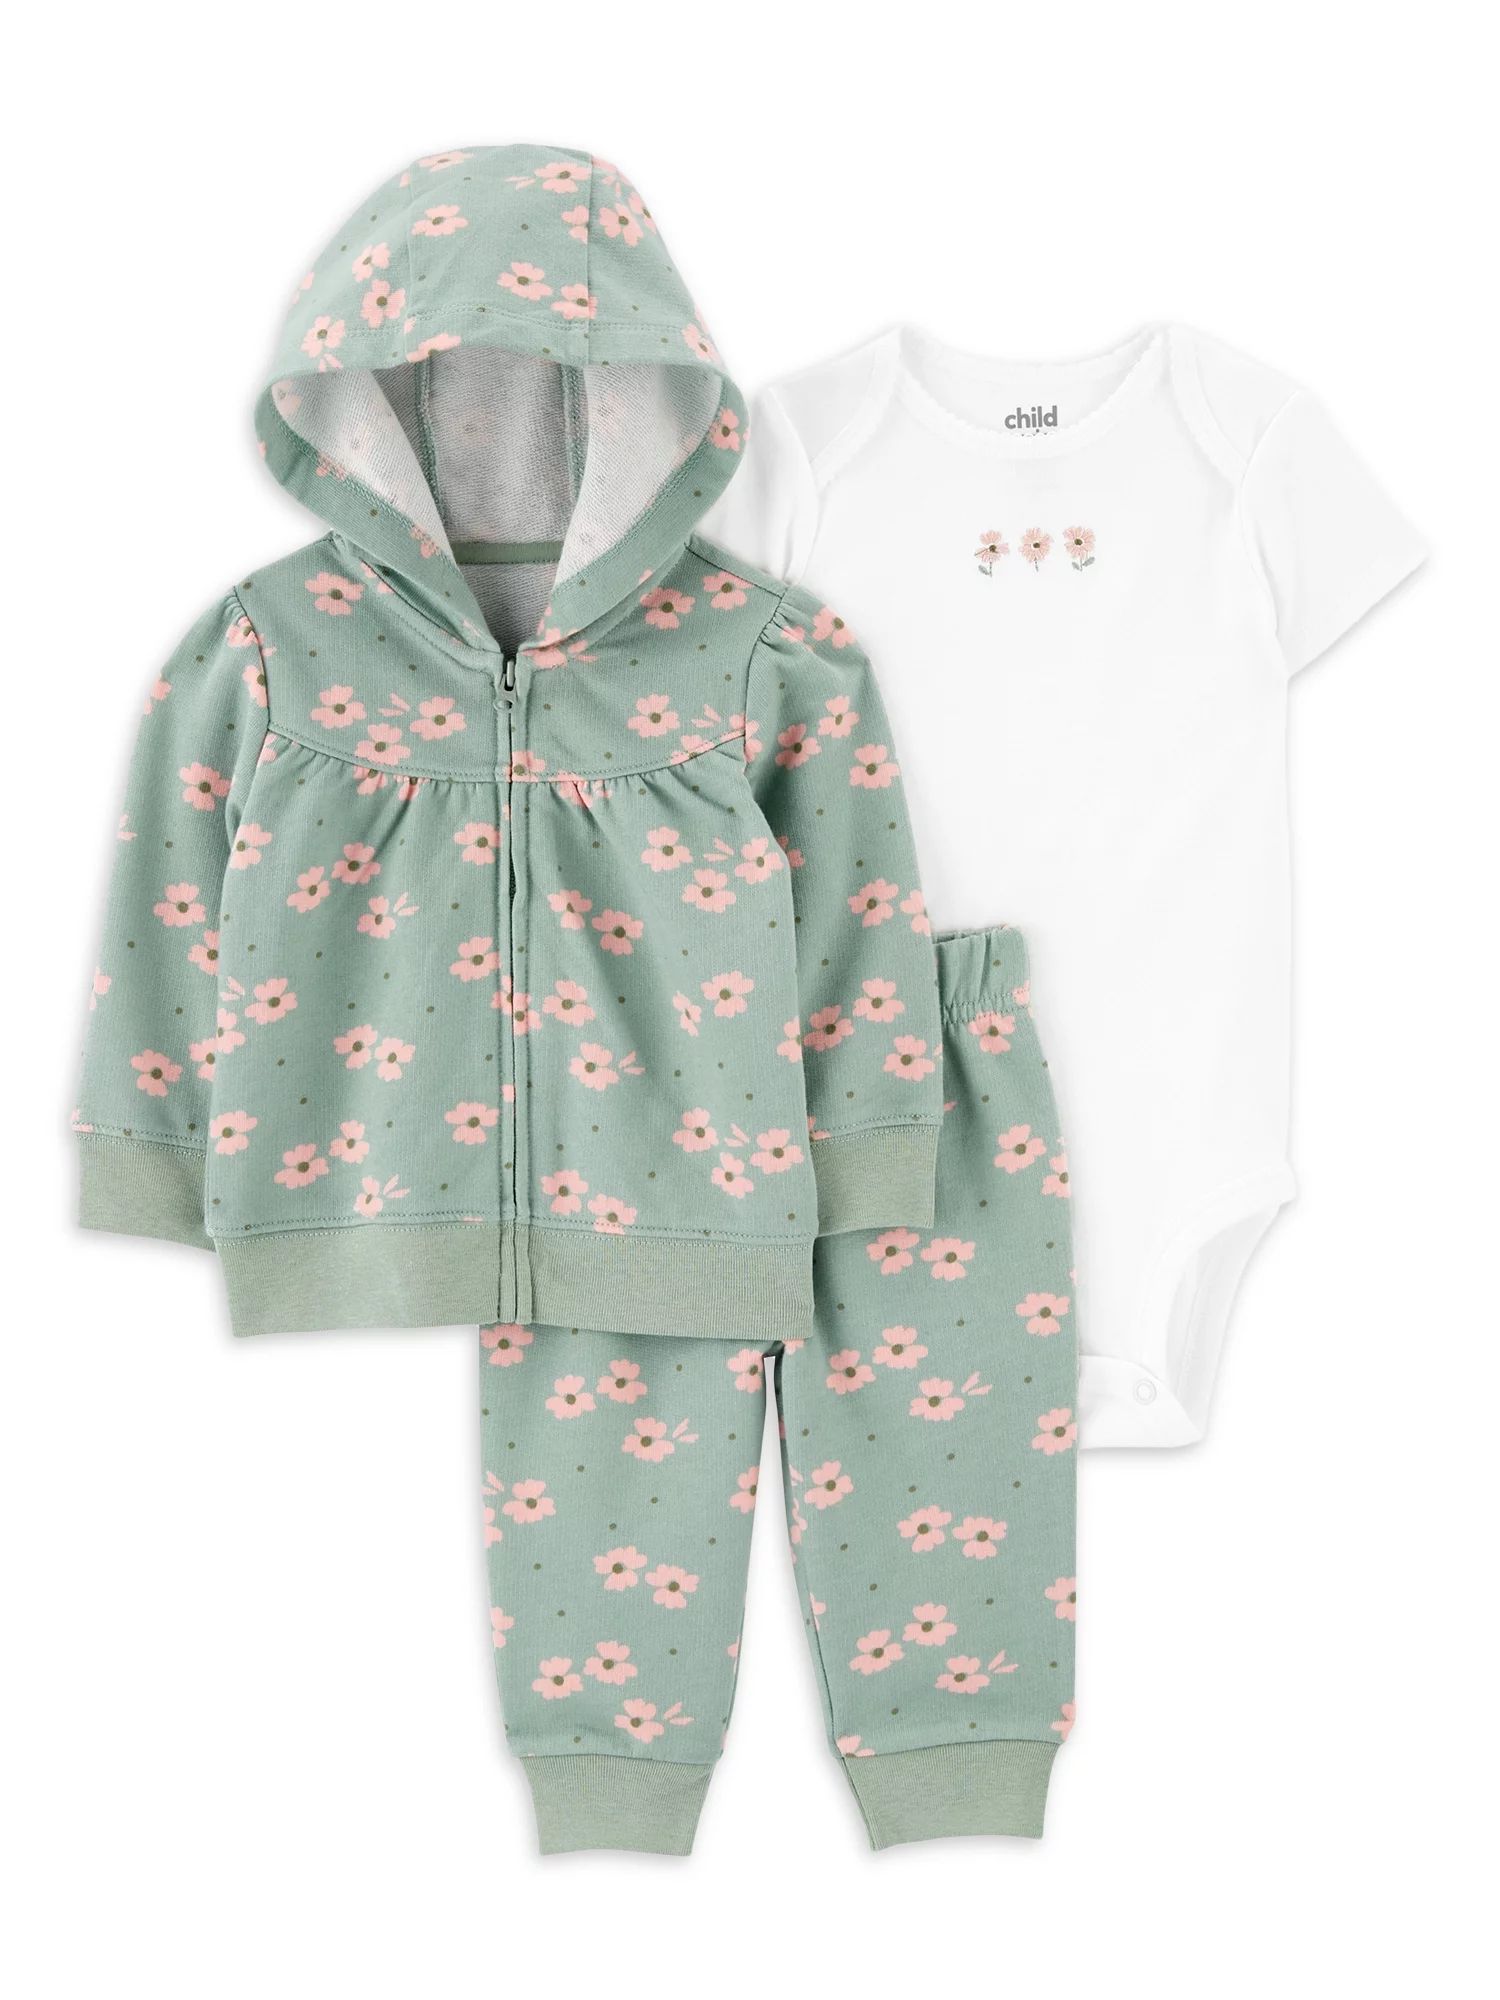 Carter's Child of Mine Baby Girls Sage Floral Cardigan Outfit Set, Sizes 0/3-24 Months | Walmart (US)